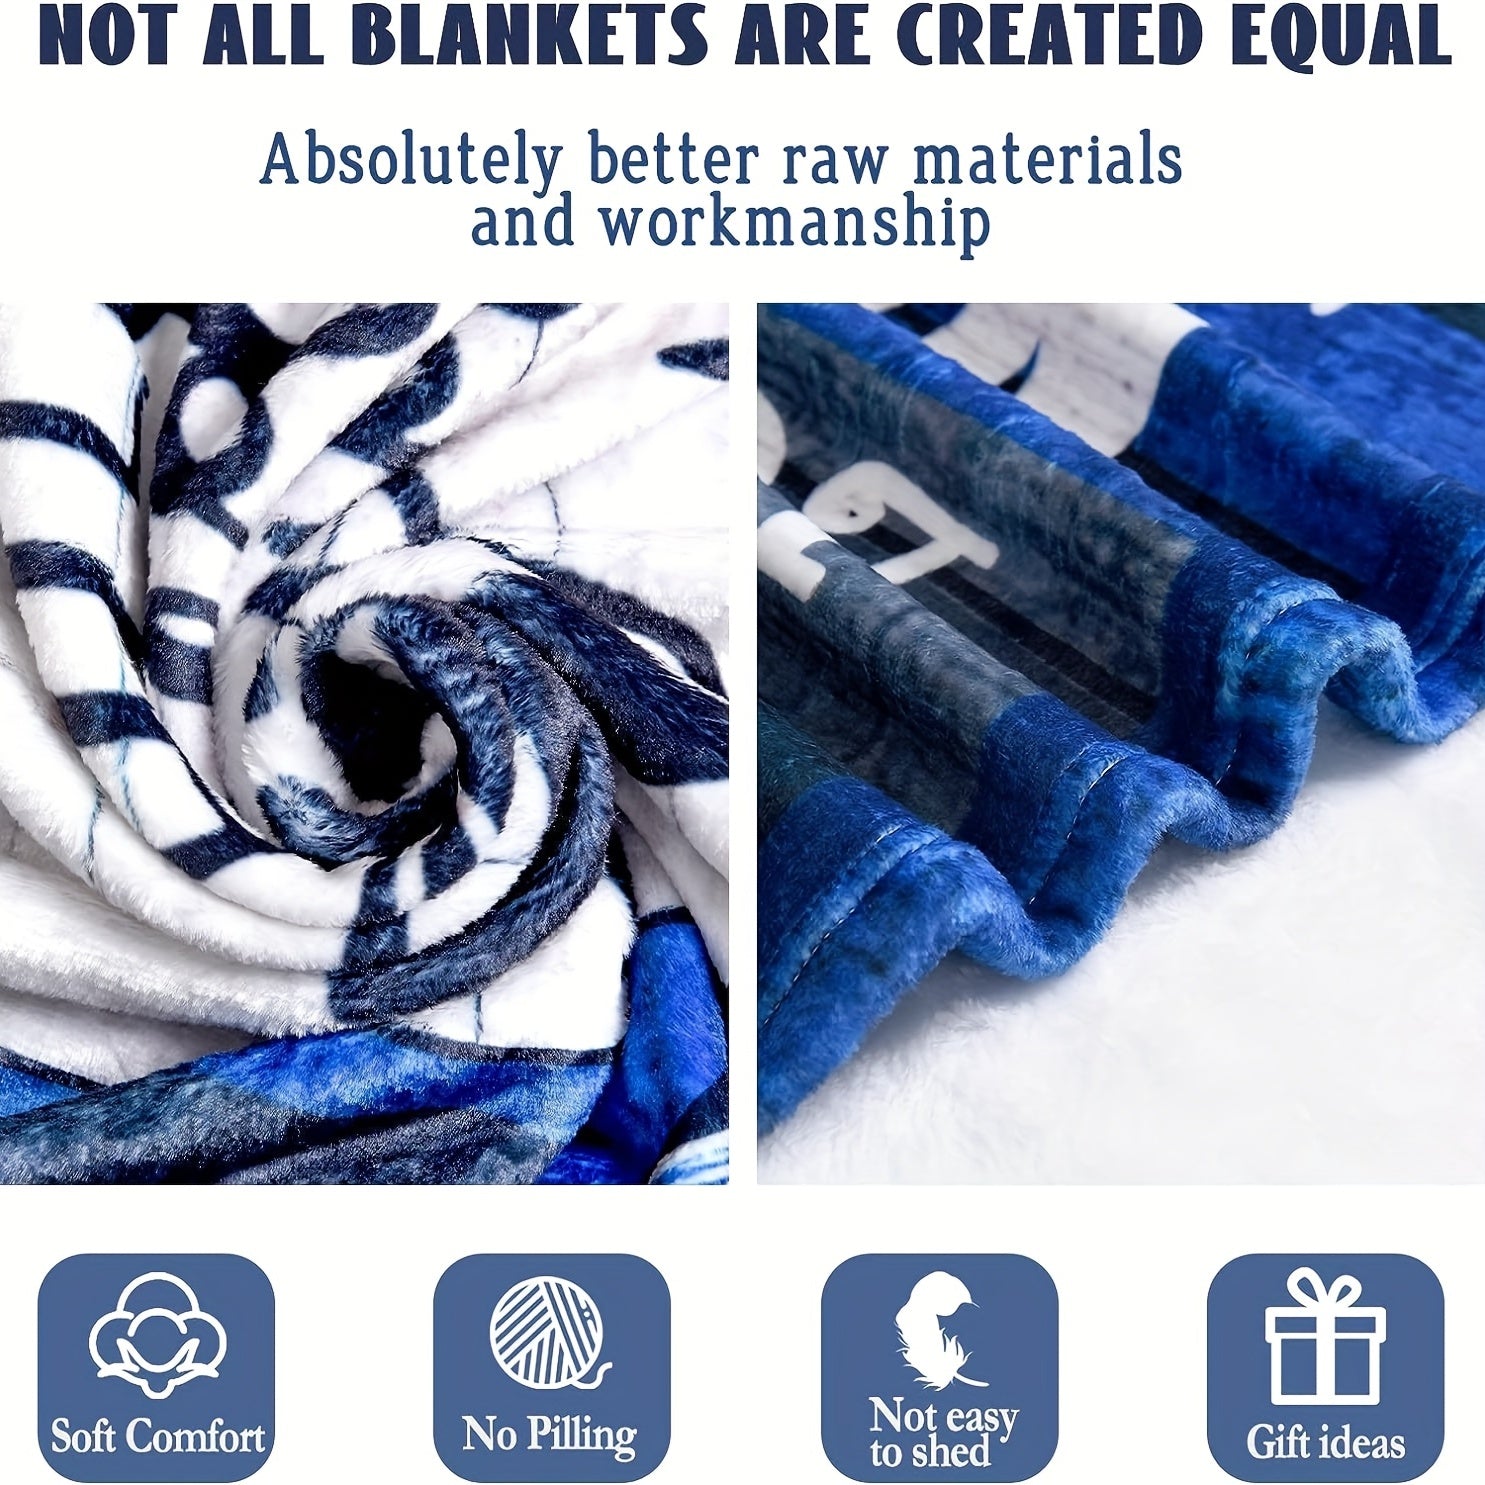 Bible Blanket,god Says You Are Blanket,healing Thoughts And Prayers - Religious Soft Inspirational Blanket, A Christian Care Gift For Women Men ShopOnlyDeal